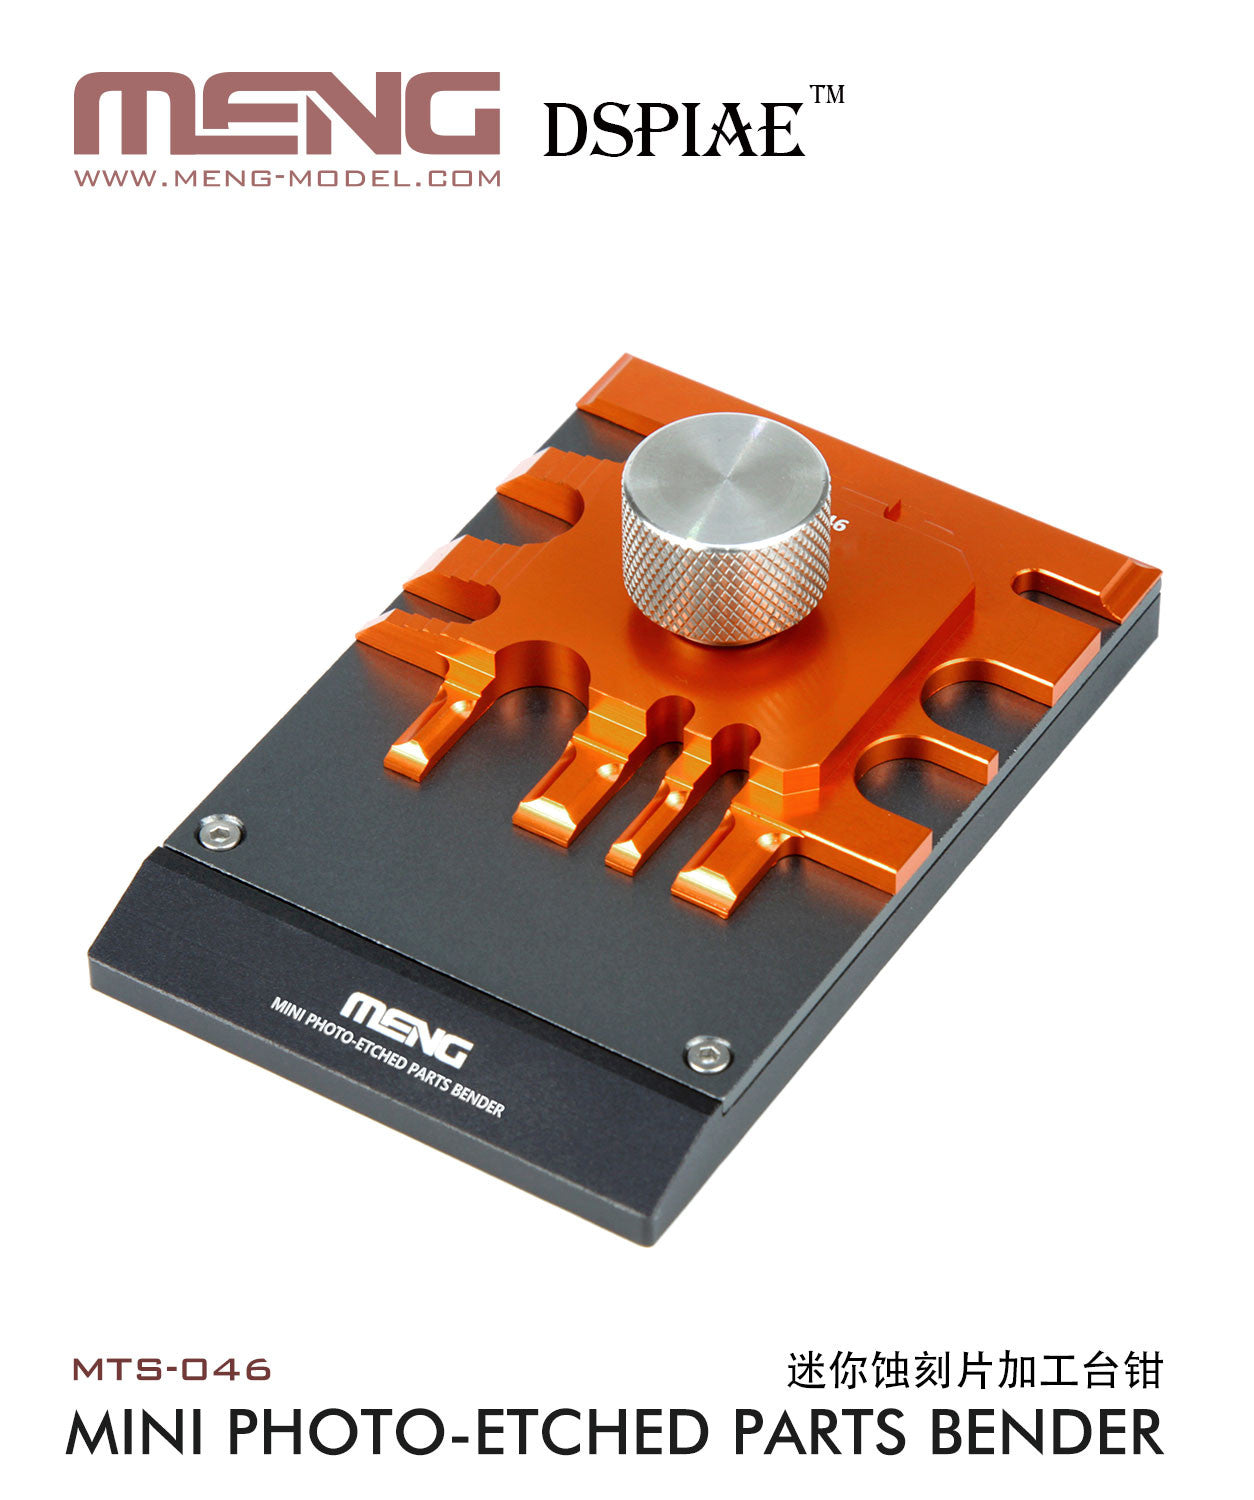 Meng X DSPIAE Mini Photo Etch parts bender (MTS-046)